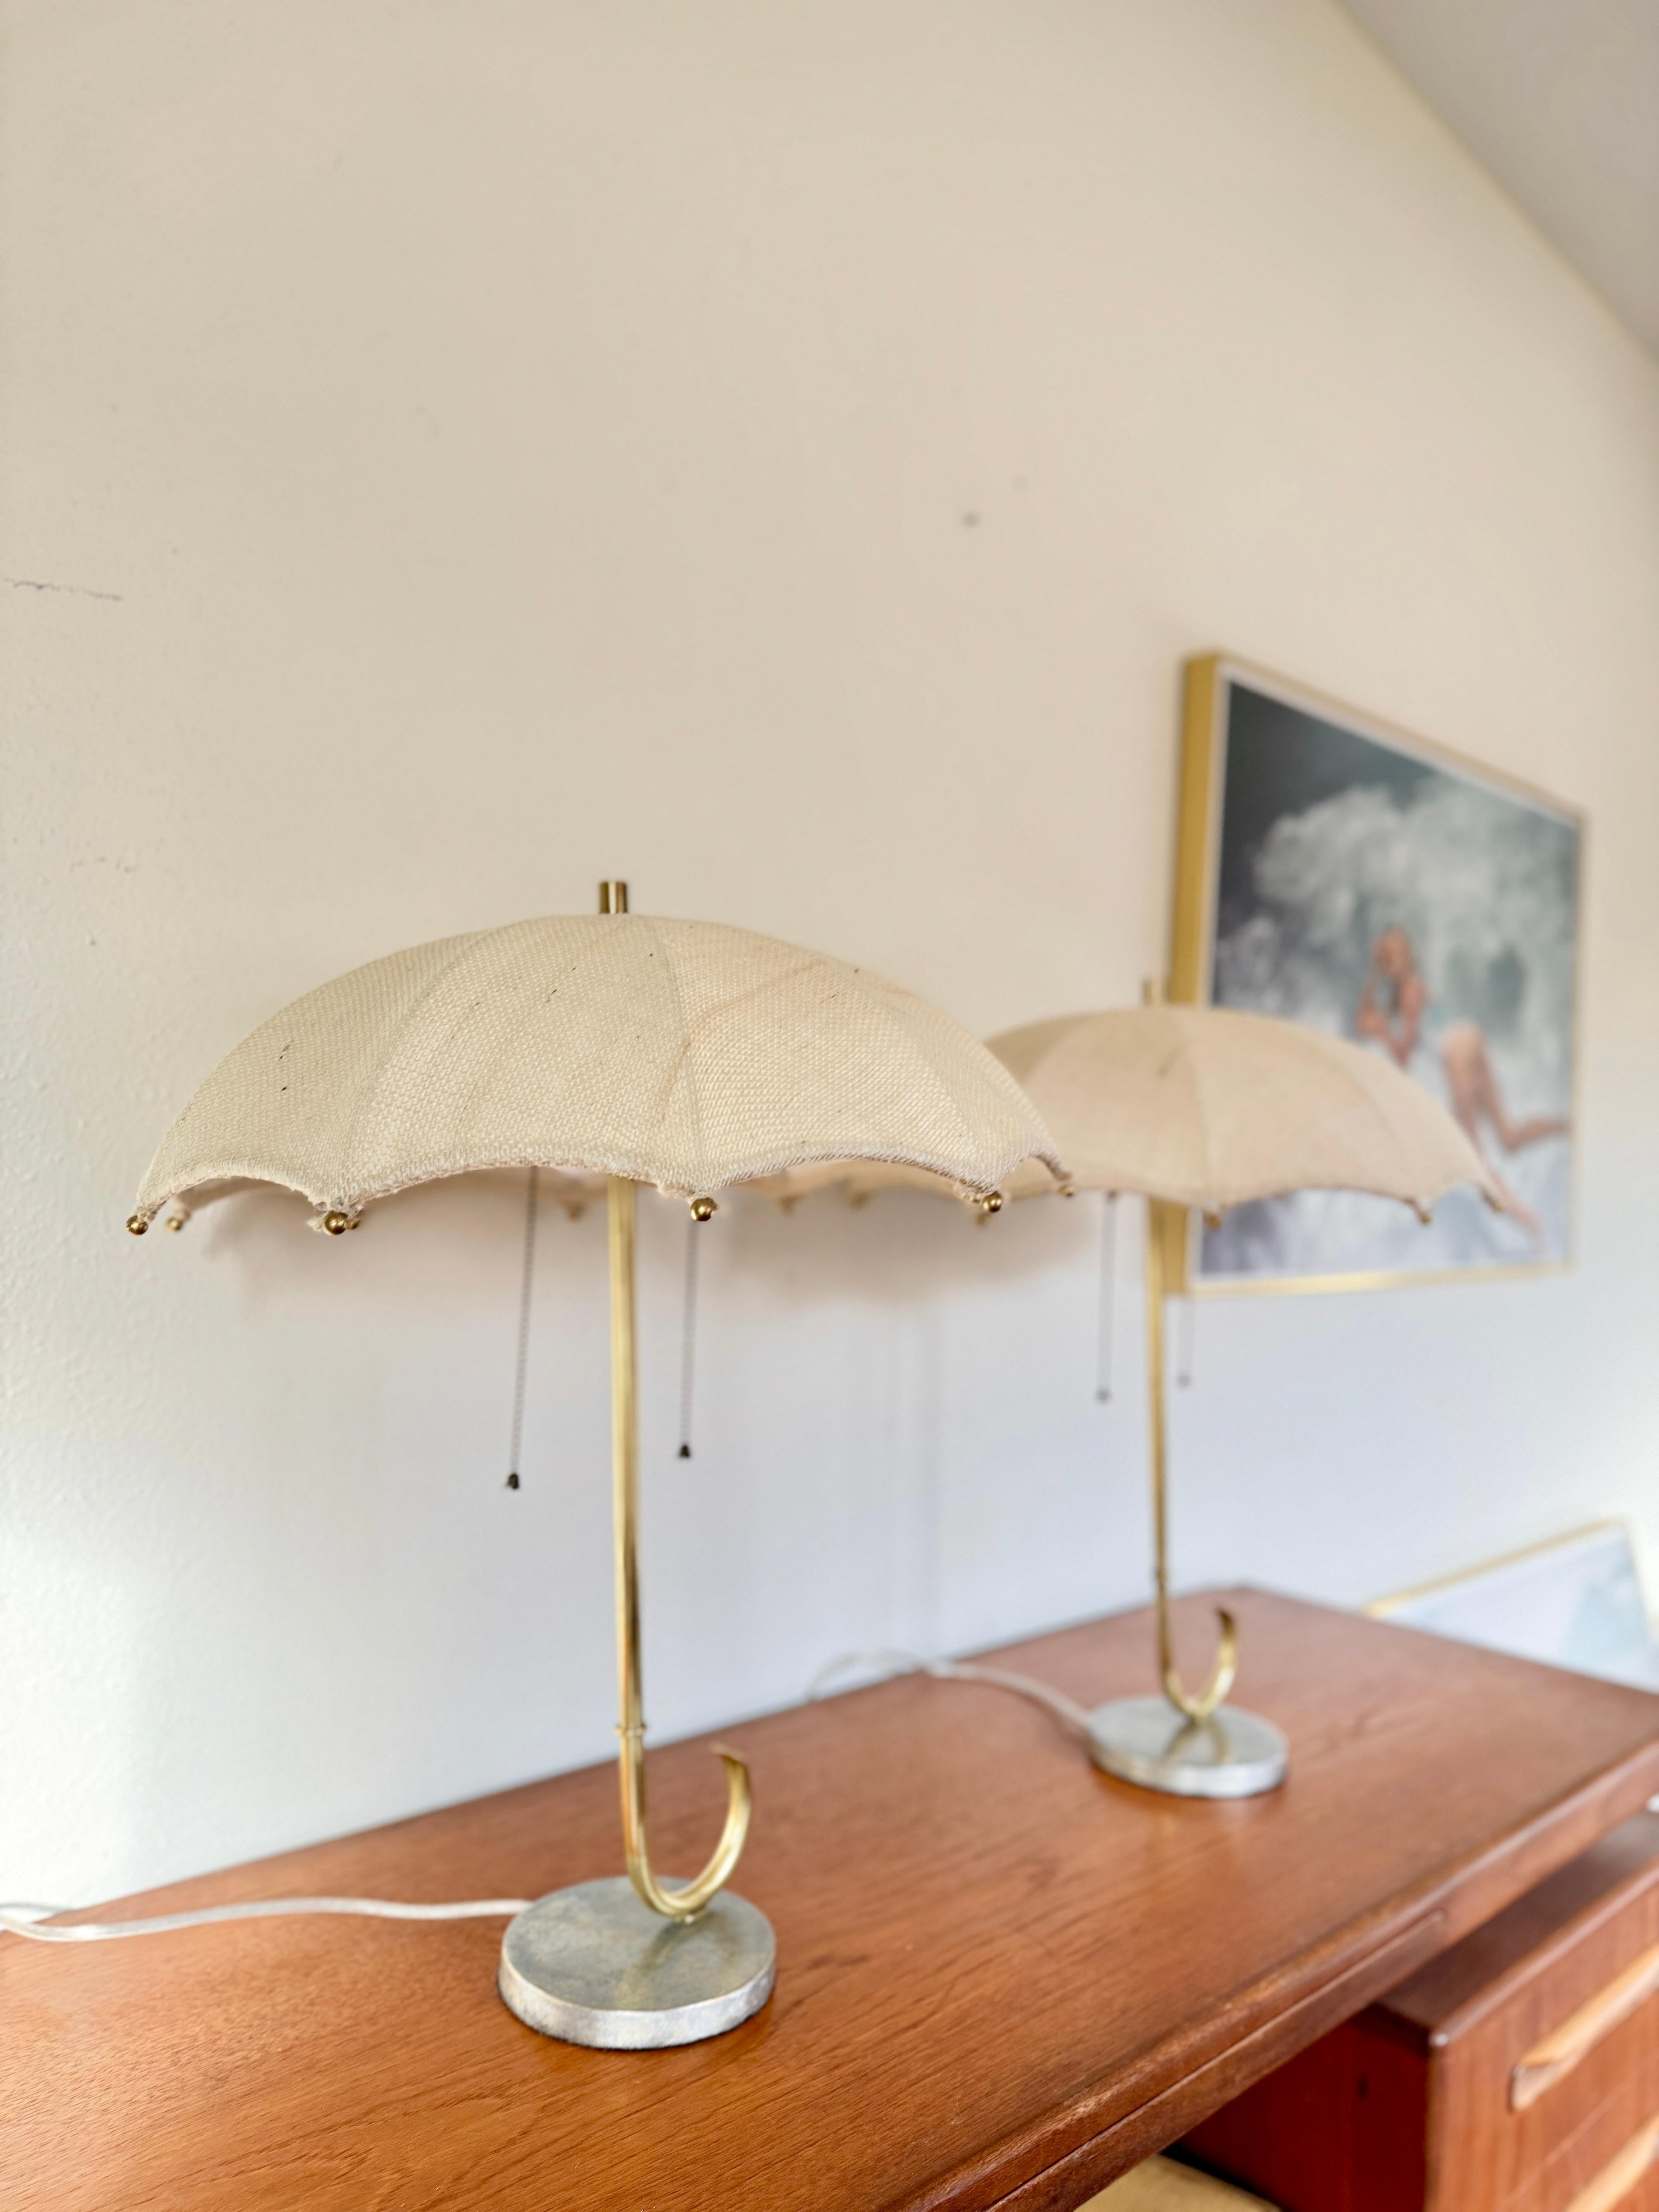 Pair of umbrella table lamps by Gilbert Rohde for Mutual Sunset lamp co 1930s For Sale 1